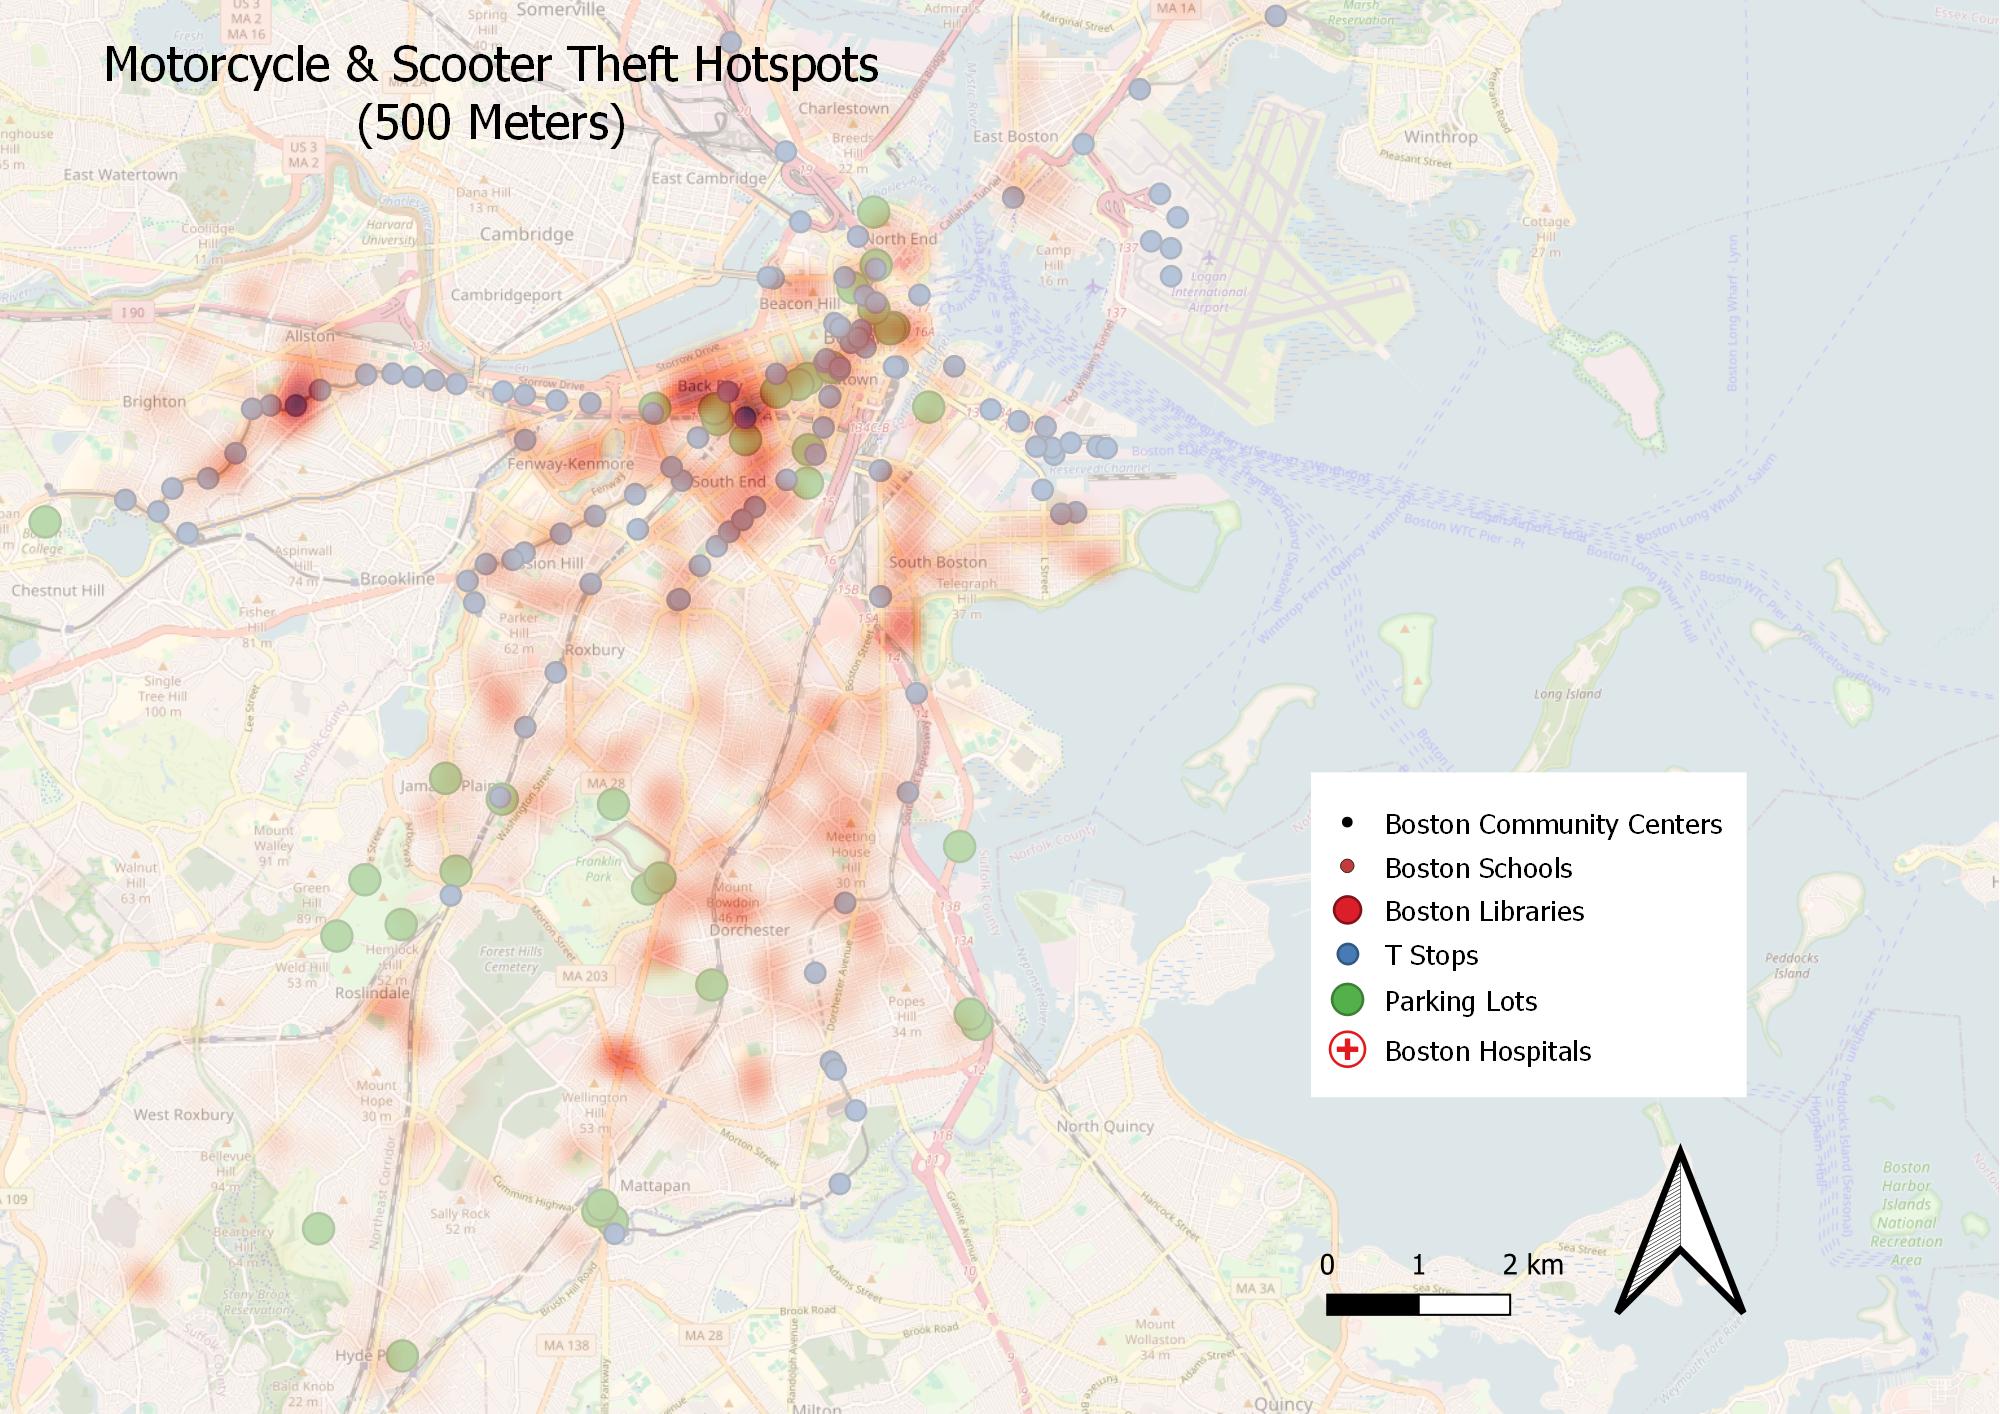 Motorcycle & Scooter Theft Hotspots Boston